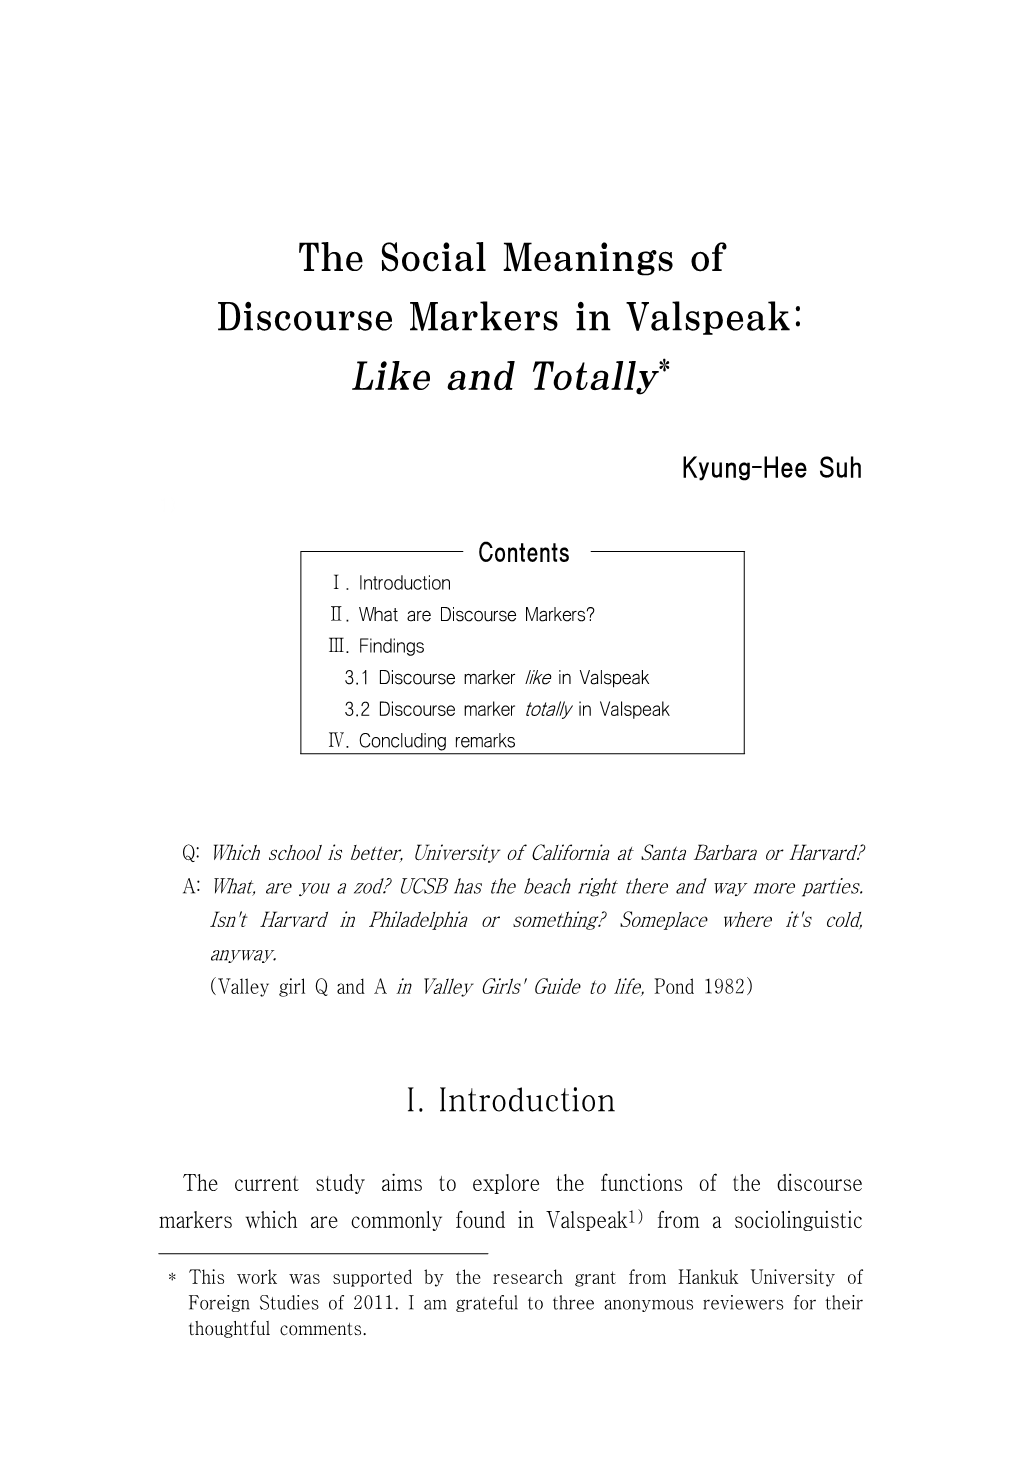 The Social Meanings of Discourse Markers in Valspeak: Like and Totally*